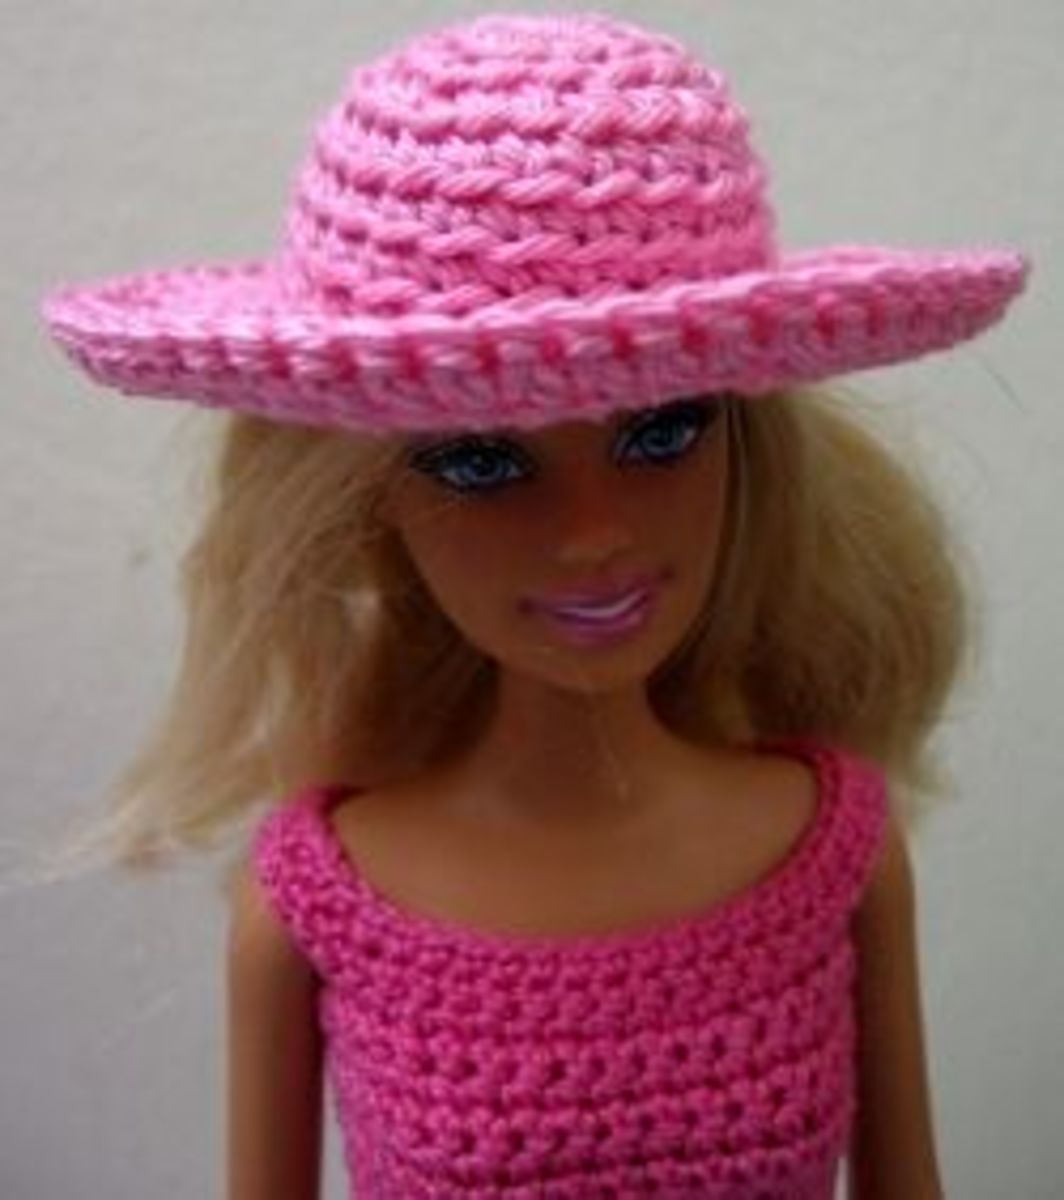 how to crochet barbie doll hat (pattern) | hubpages